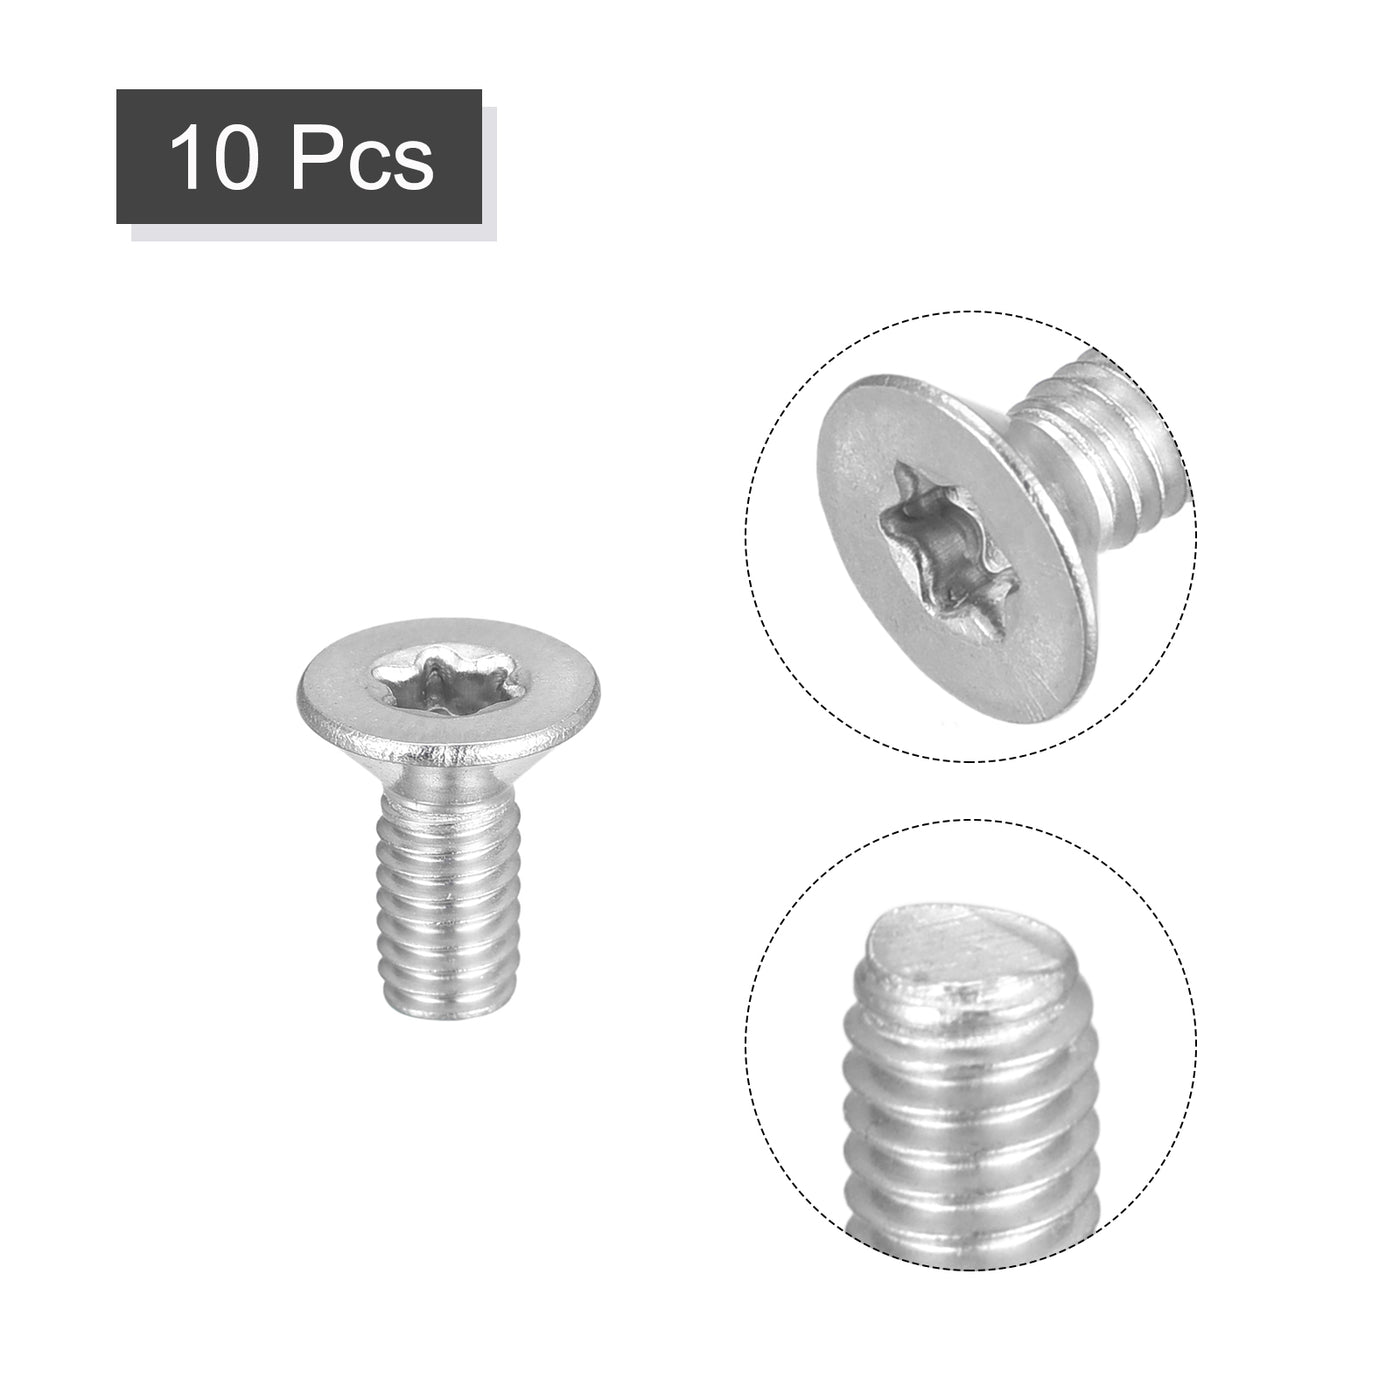 uxcell Uxcell M4x10mm Torx Security Screws, 10pcs 316 Stainless Steel Countersunk Head Screw